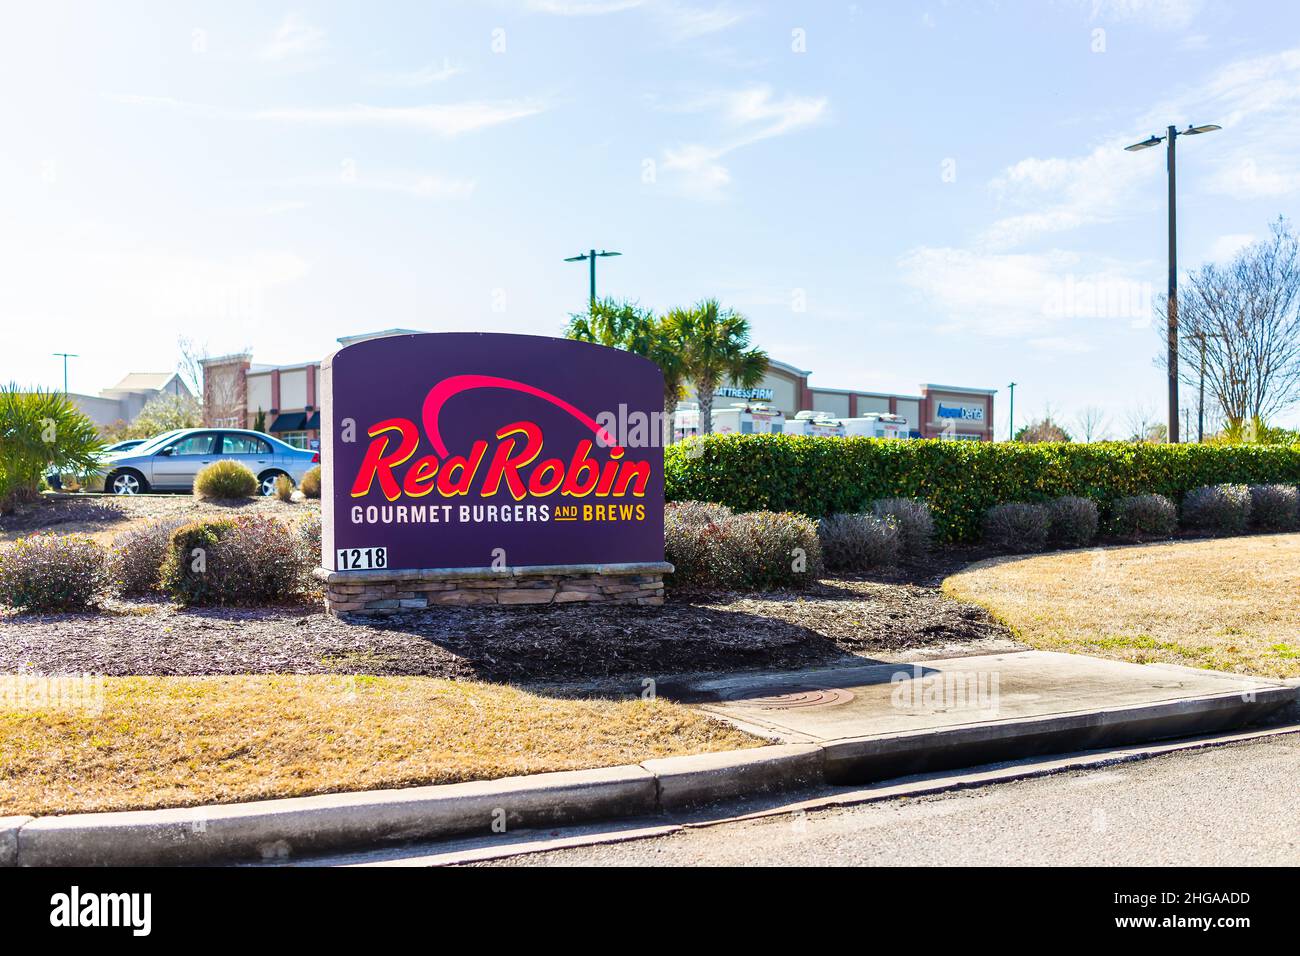 Myrtle Beach, USA - February 8, 2021: Exterior facade of sign building architecture for Red Robin chain restaurant in South Carolina for gourmet burge Stock Photo